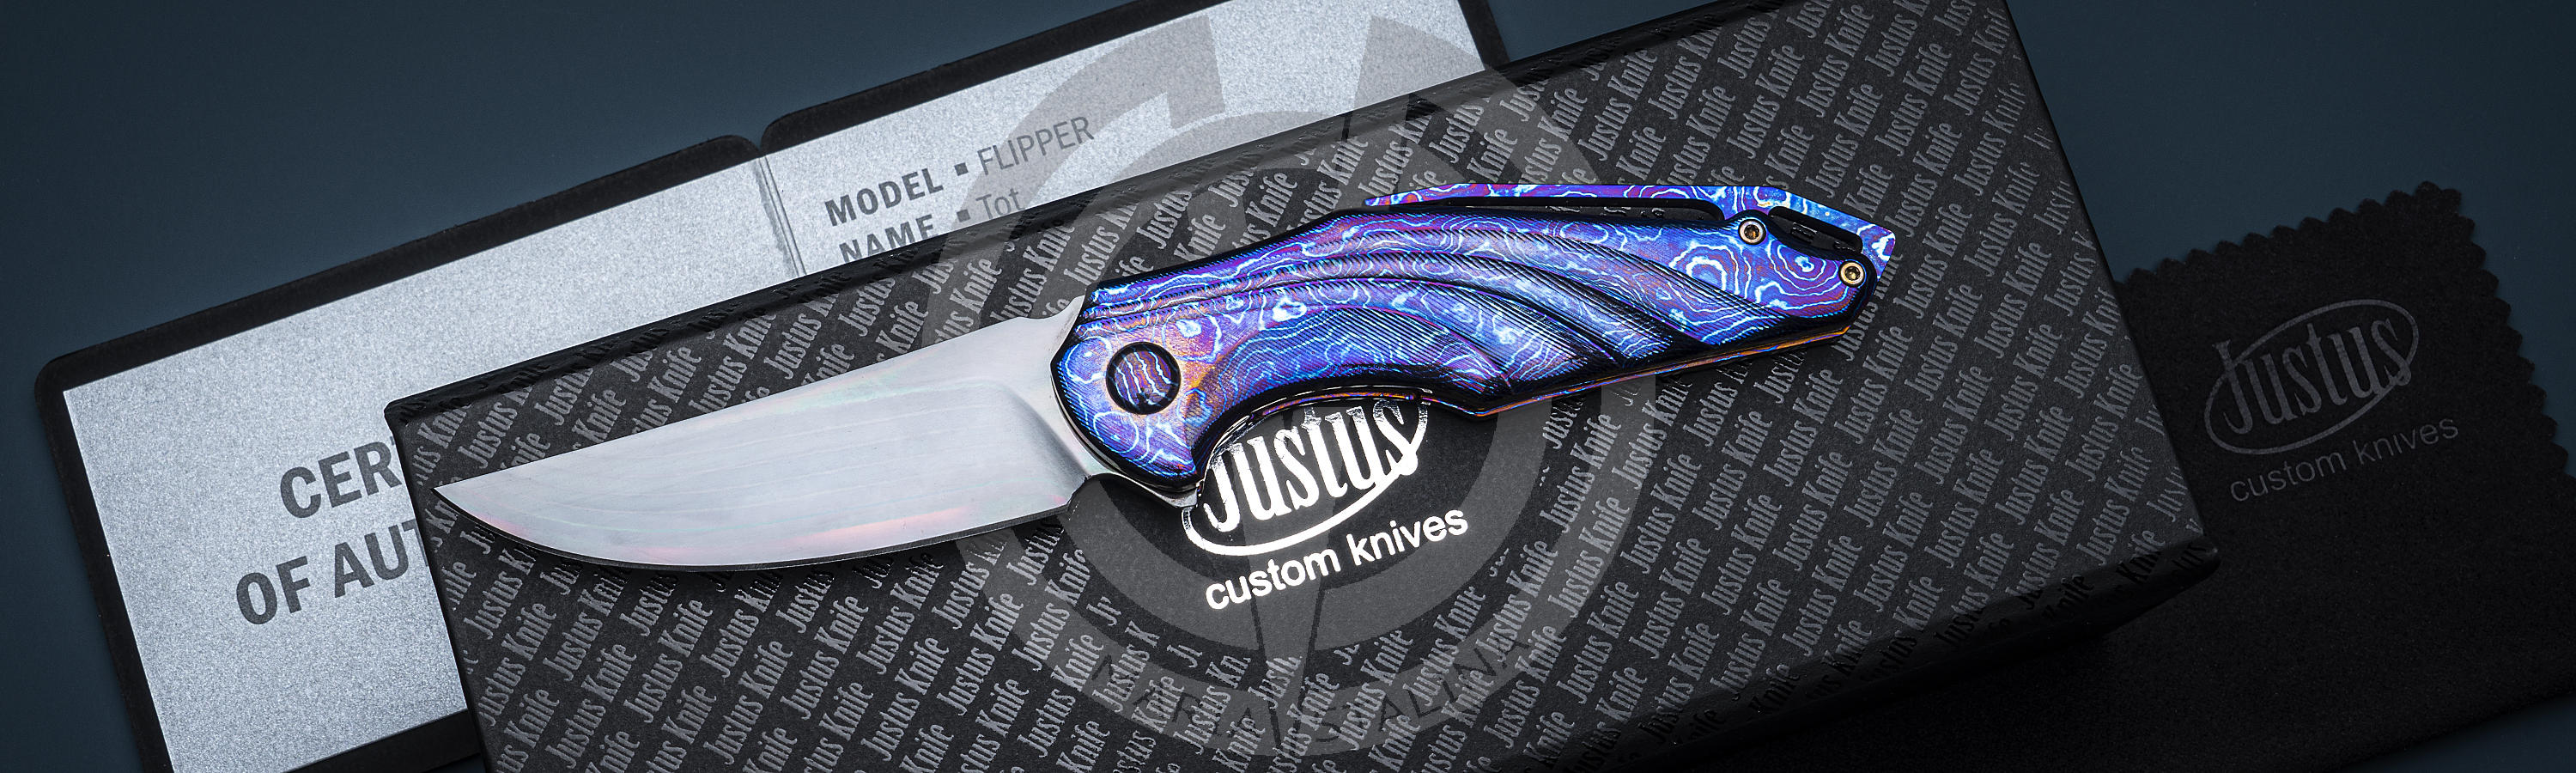 Collectible flipper Flipper Tot by Justus Knives